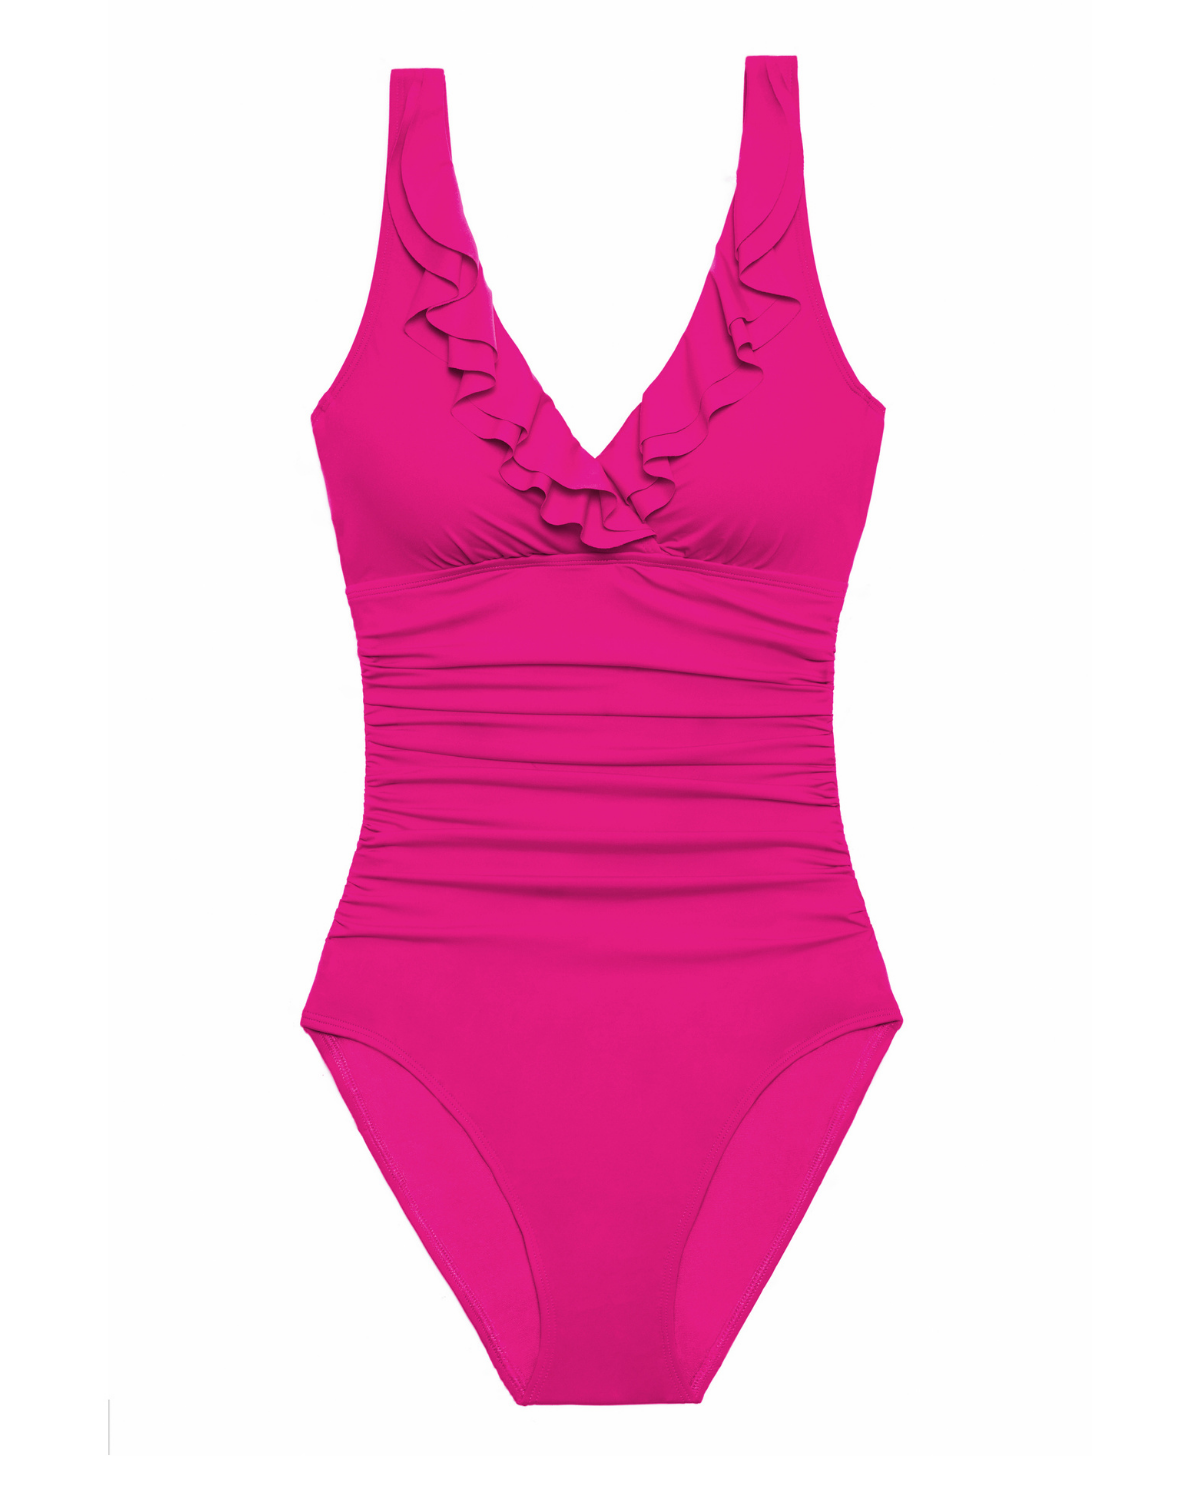 Flat lay of a v-neck one piece with a ruffle trim and shirred panel around the torso in pink